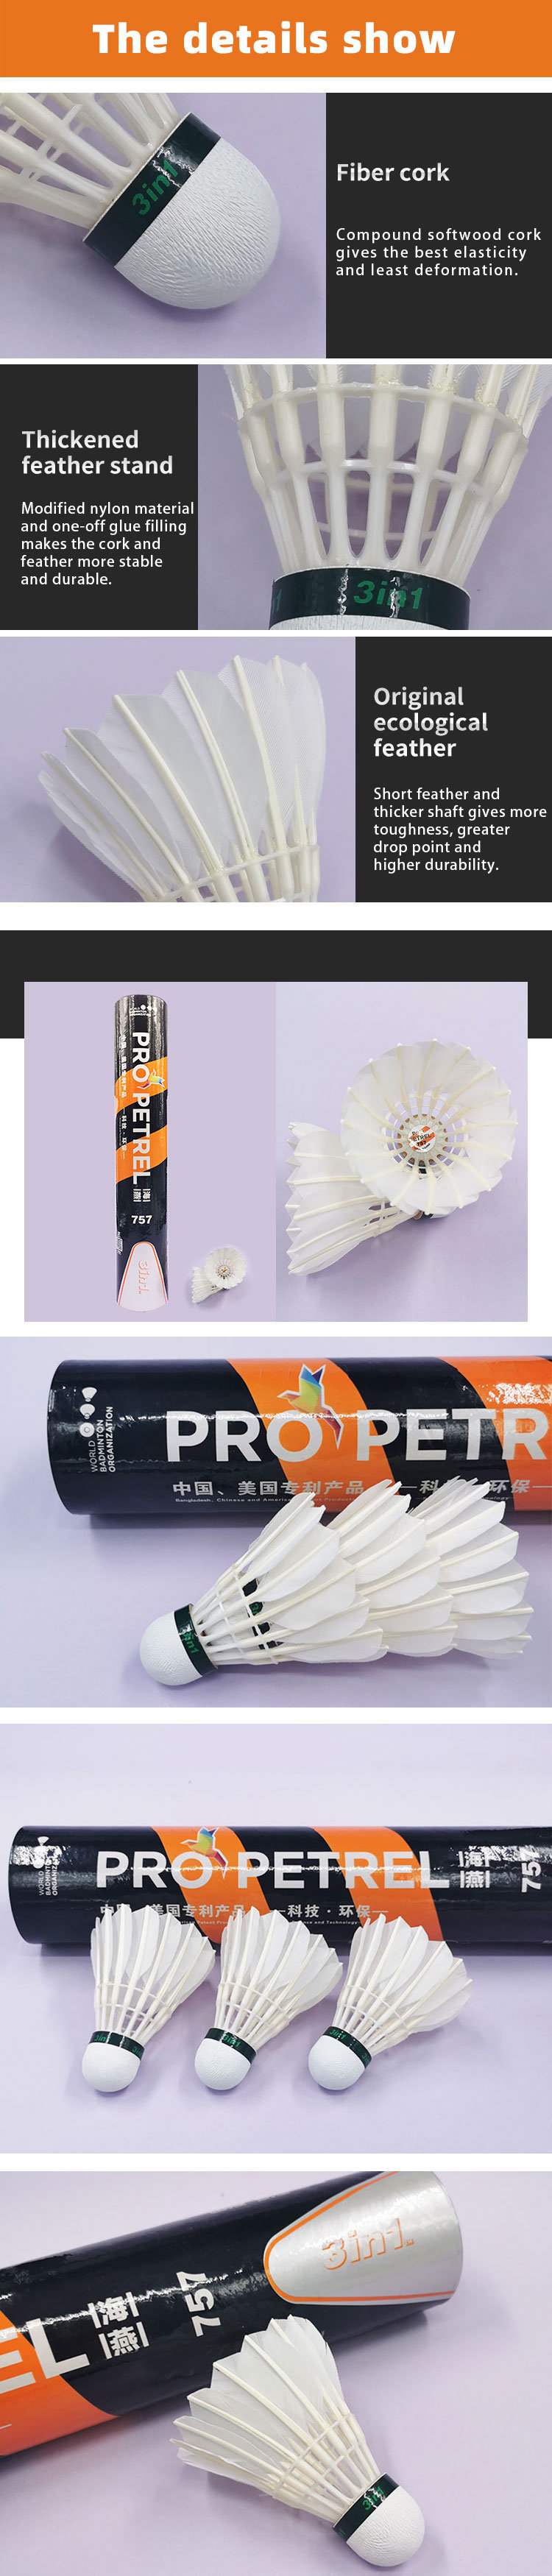 Propetrel757 Premium Durable and Stable Badminton Goose Feather Best Shuttlecock for Practice Training